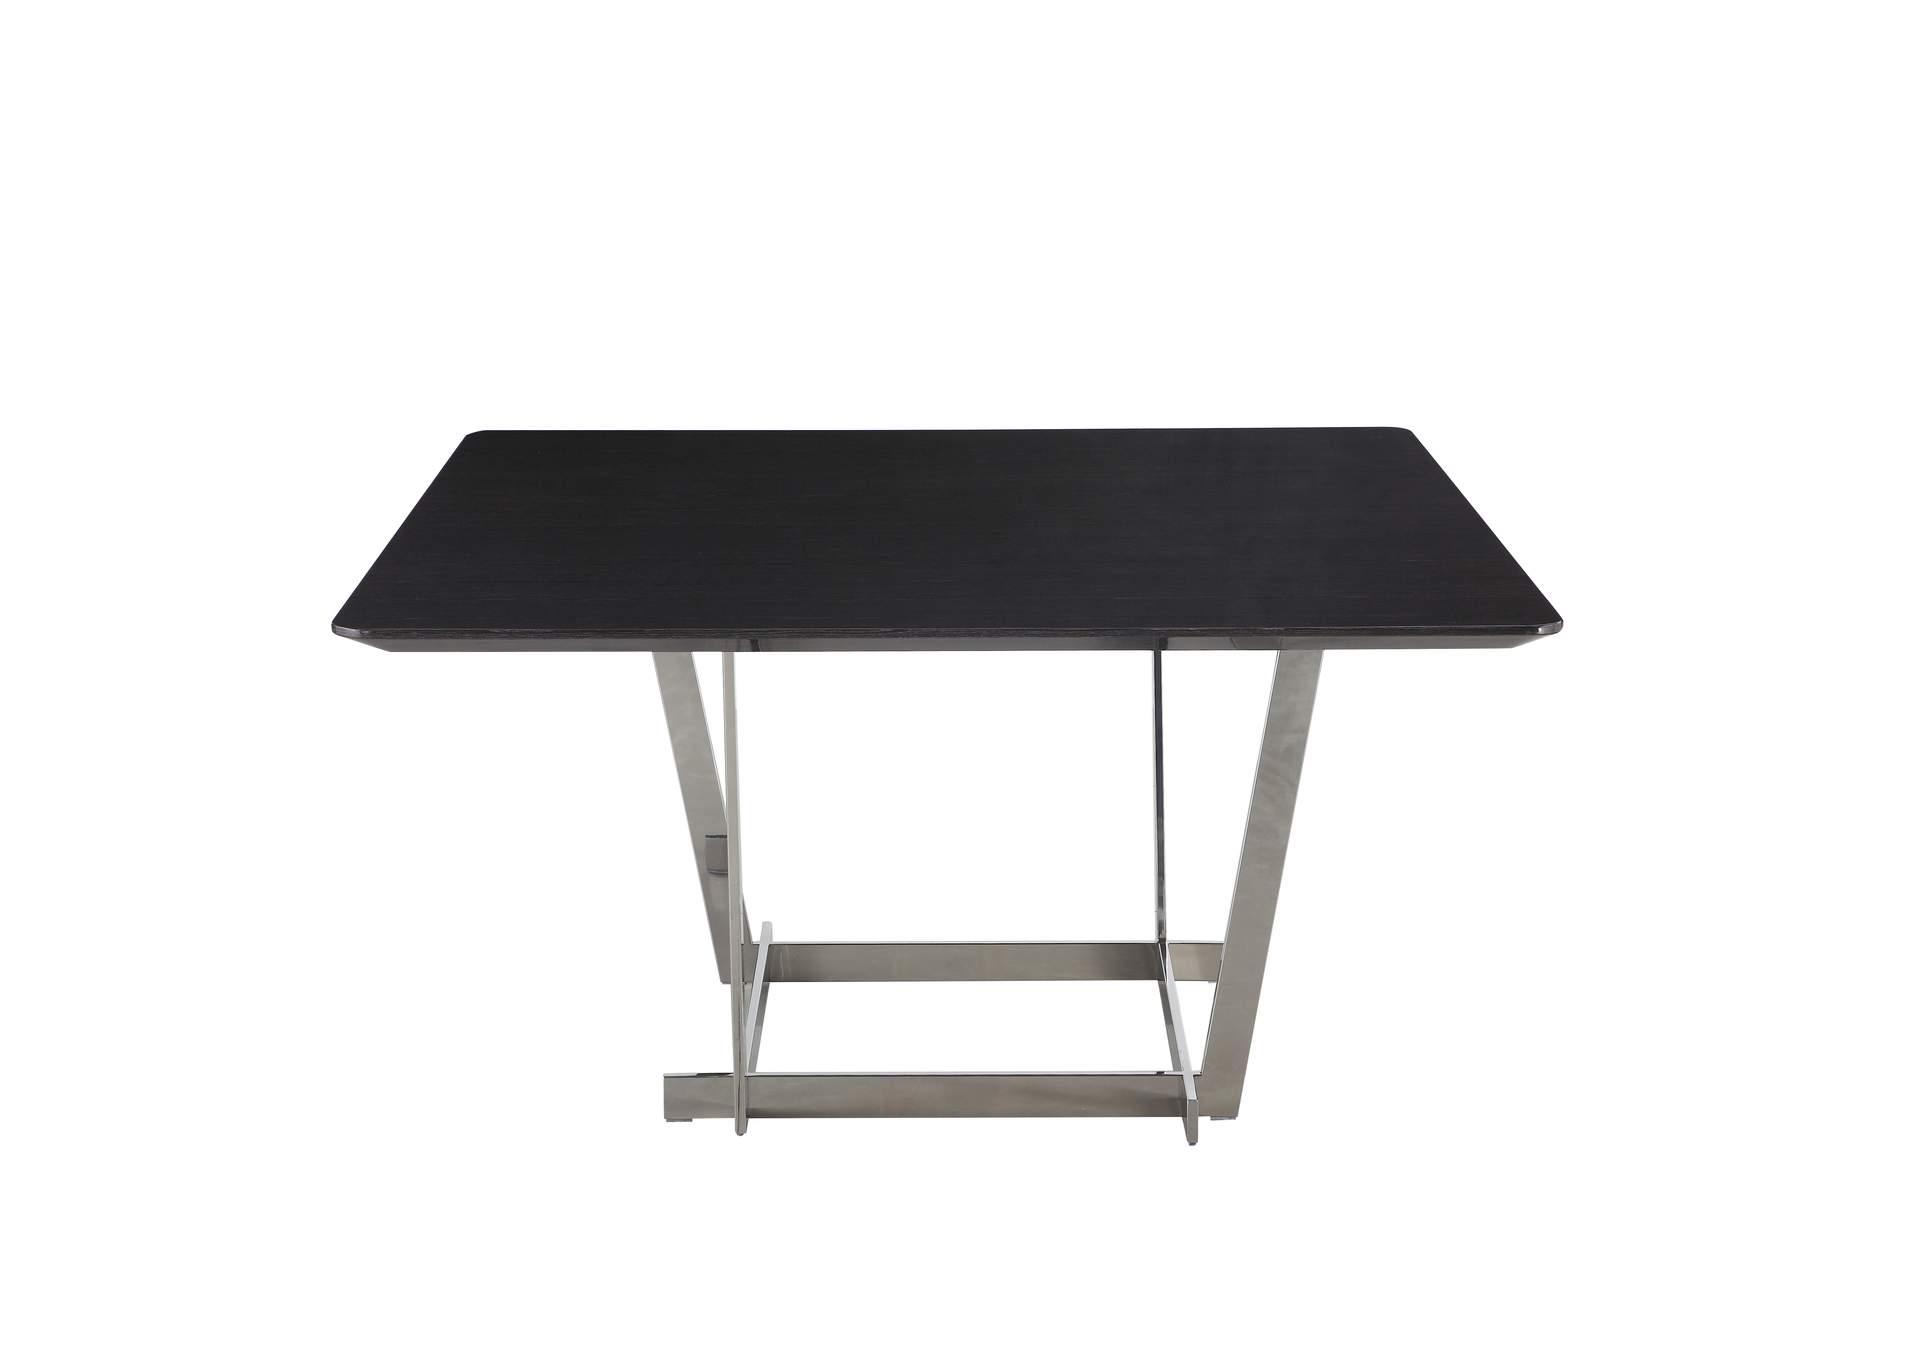 Contemporary Square Wooden Veneer Dining Table,Chintaly Imports